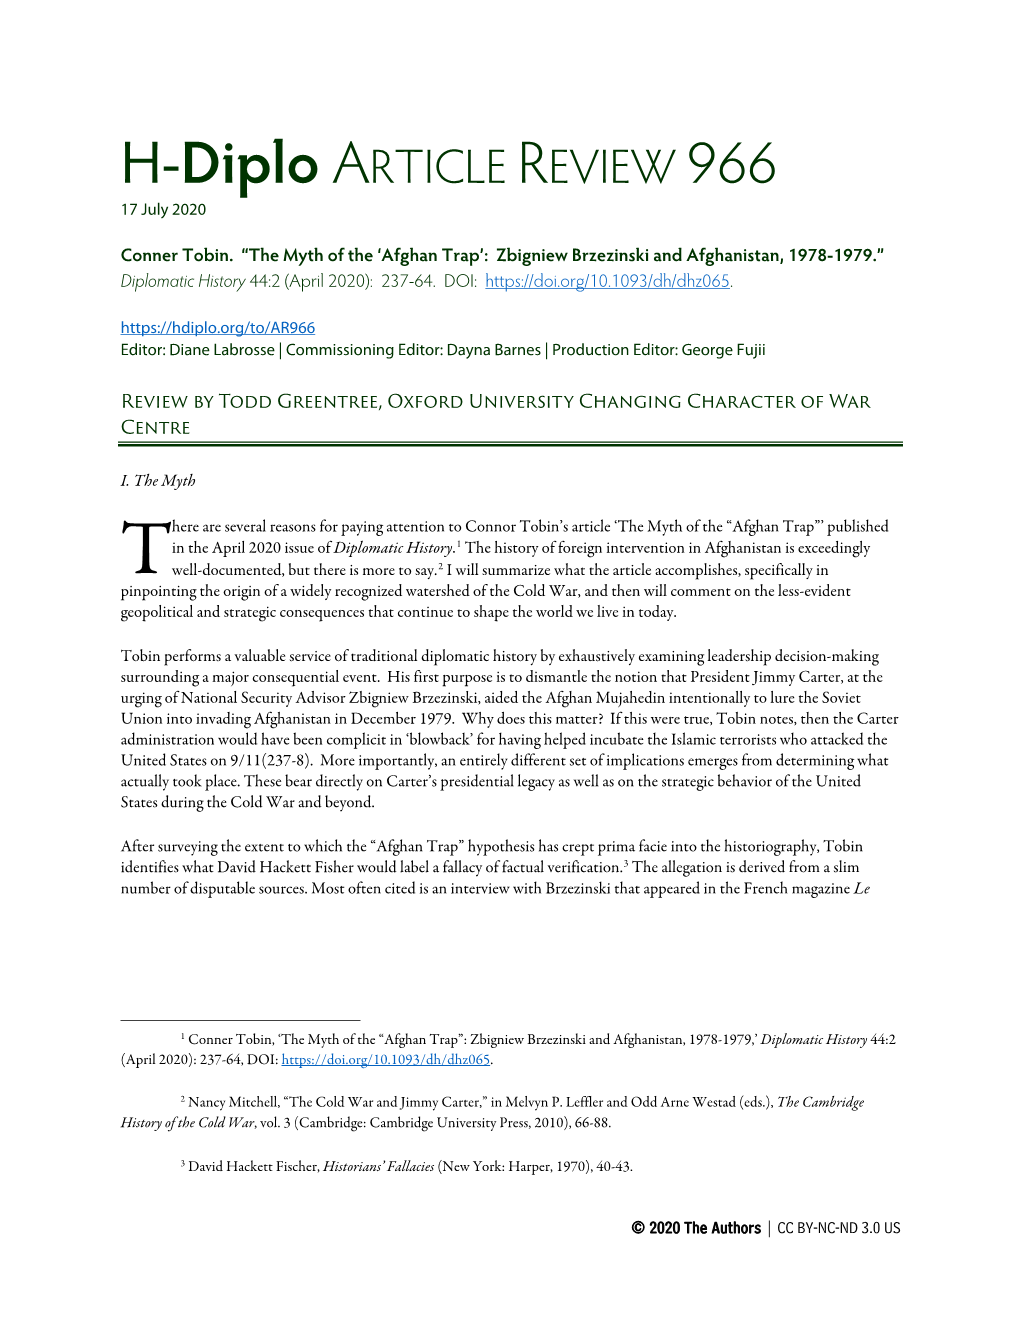 H-Diplo ARTICLE REVIEW 966 17 July 2020